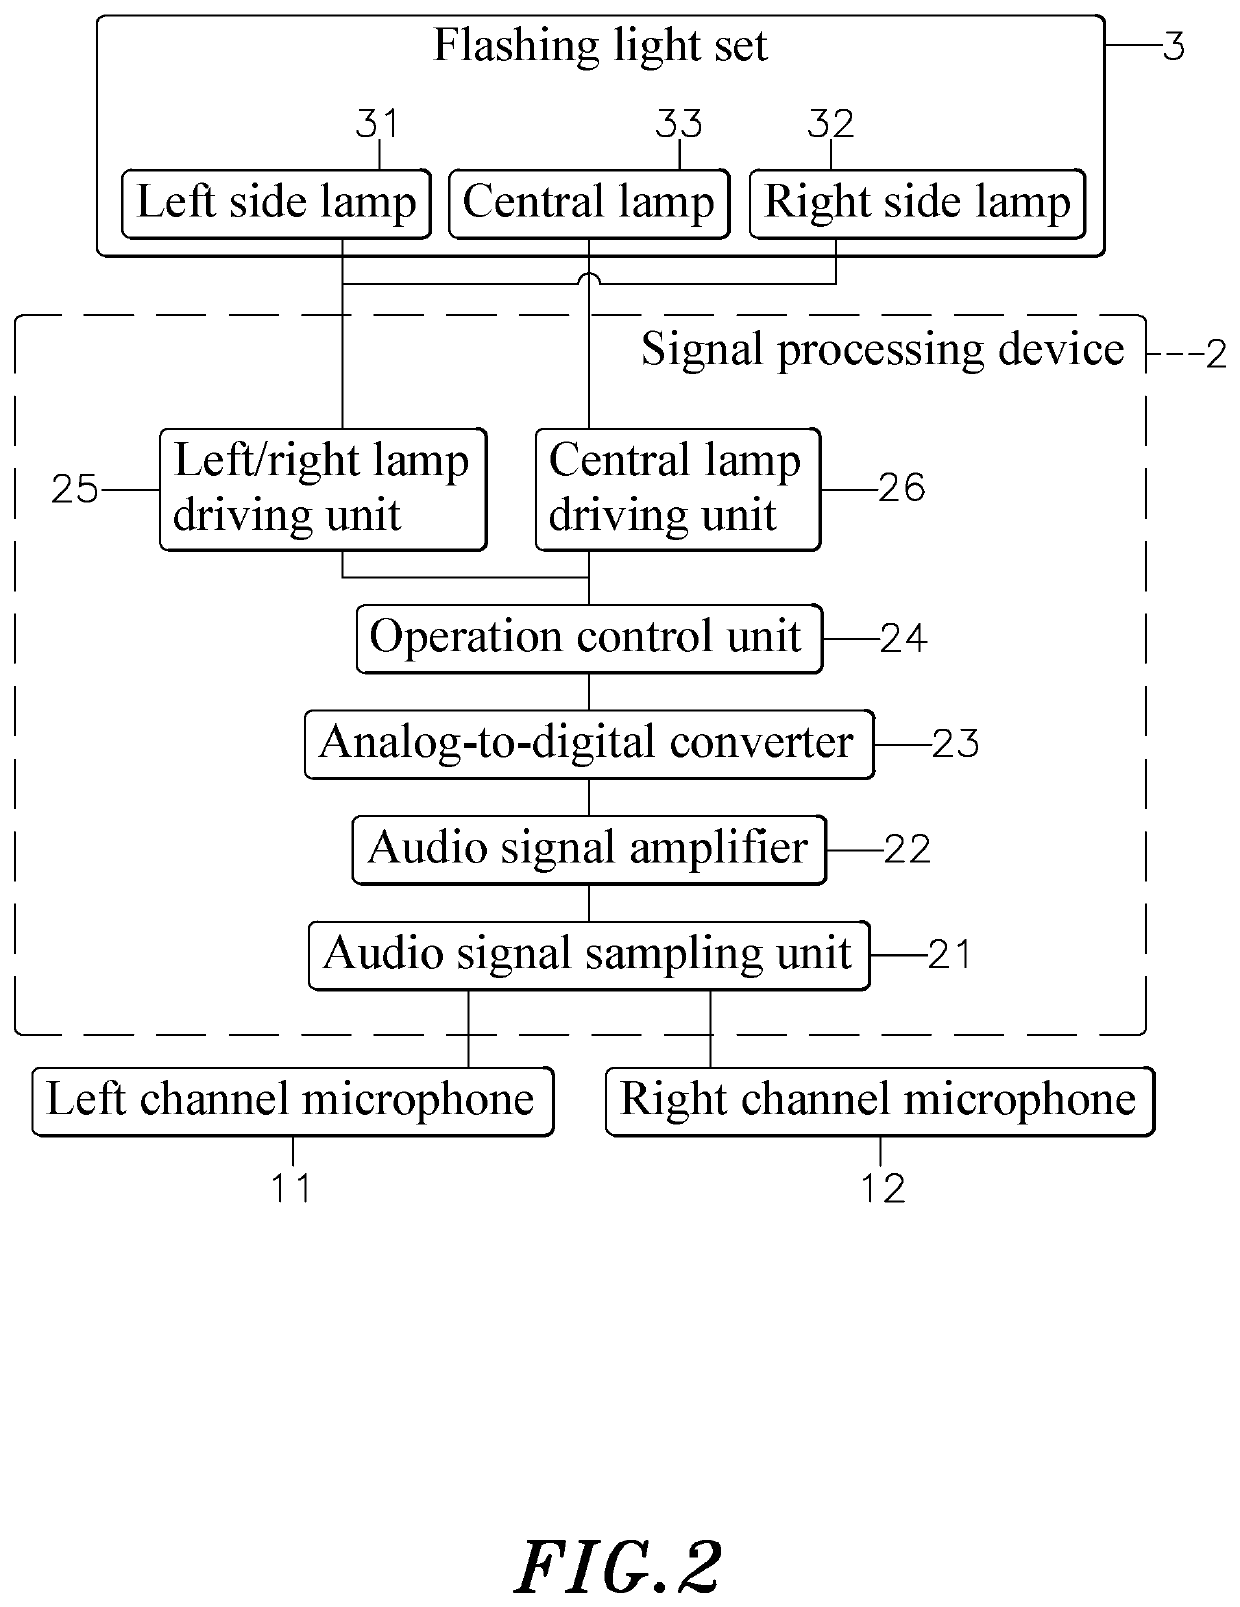 Method of using stereo recording to control the flashing of central lamps